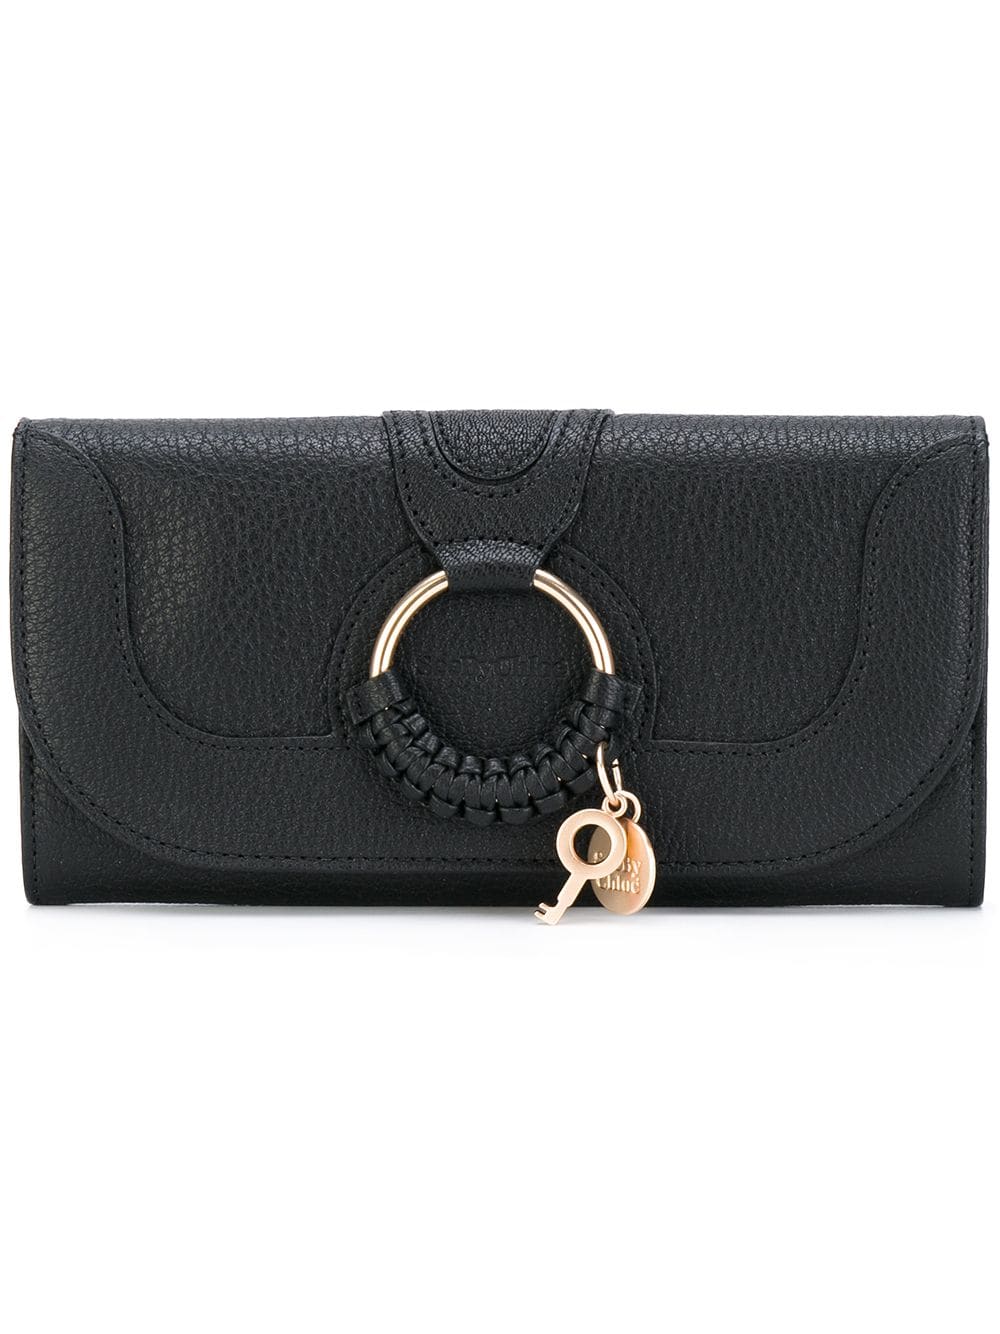 SEE BY CHLOE` BLACK LEATHER WALLET